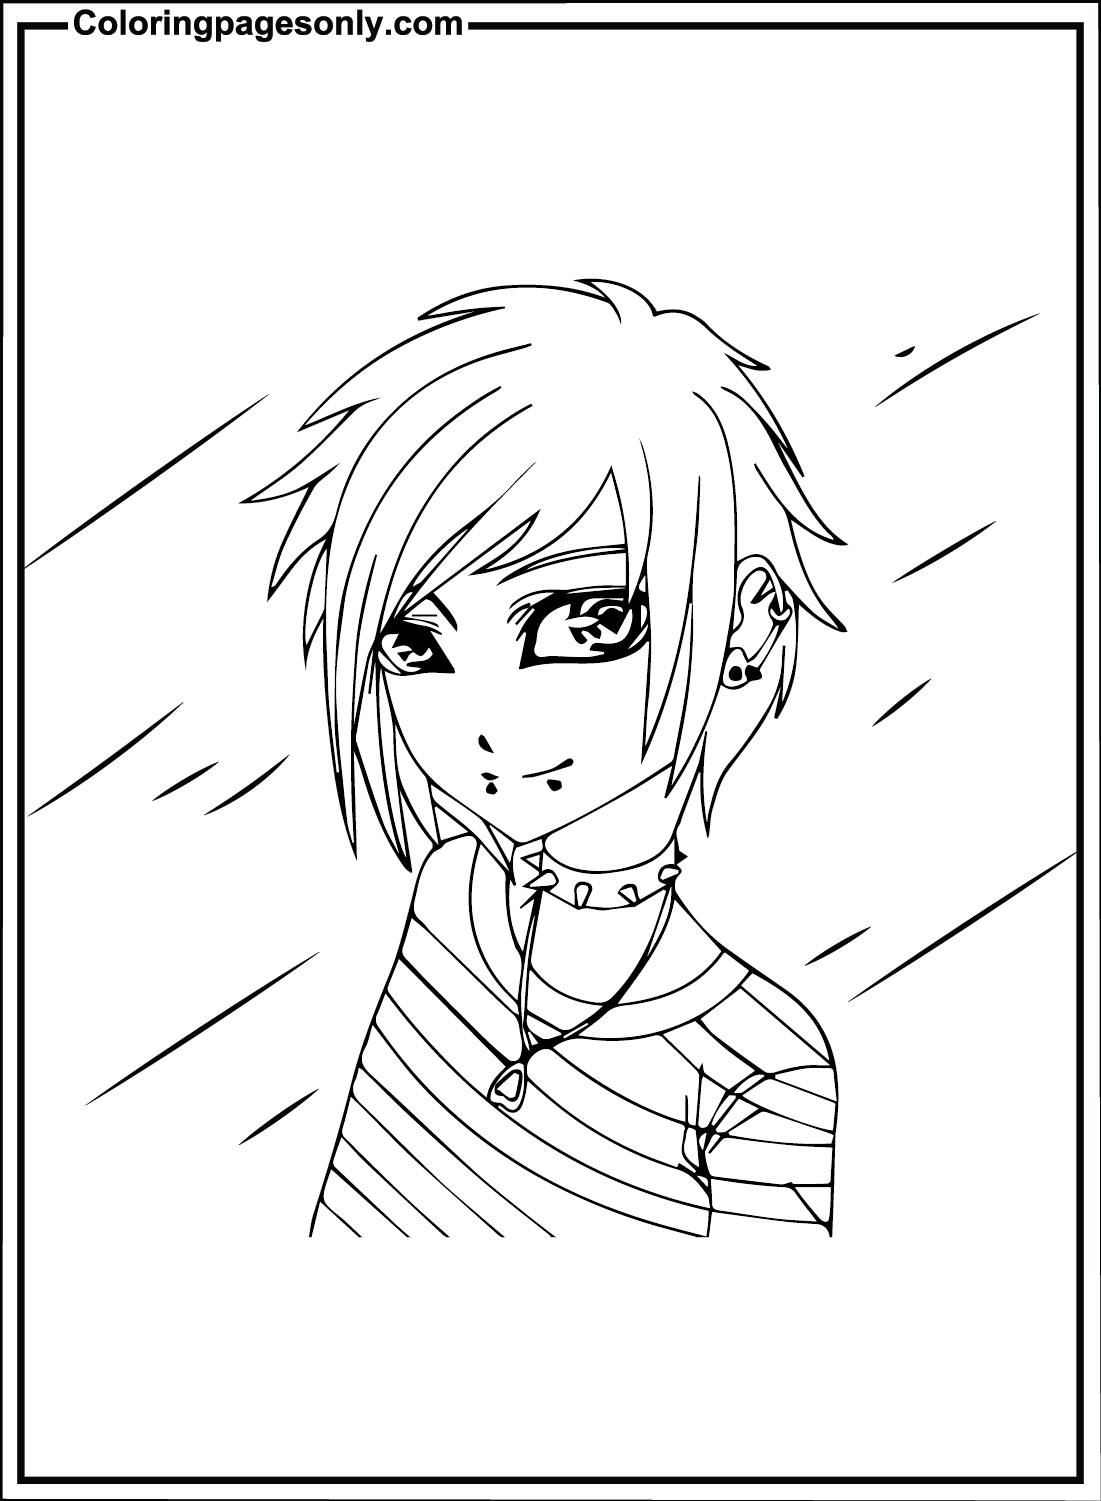 Emo Style Coloring Pages